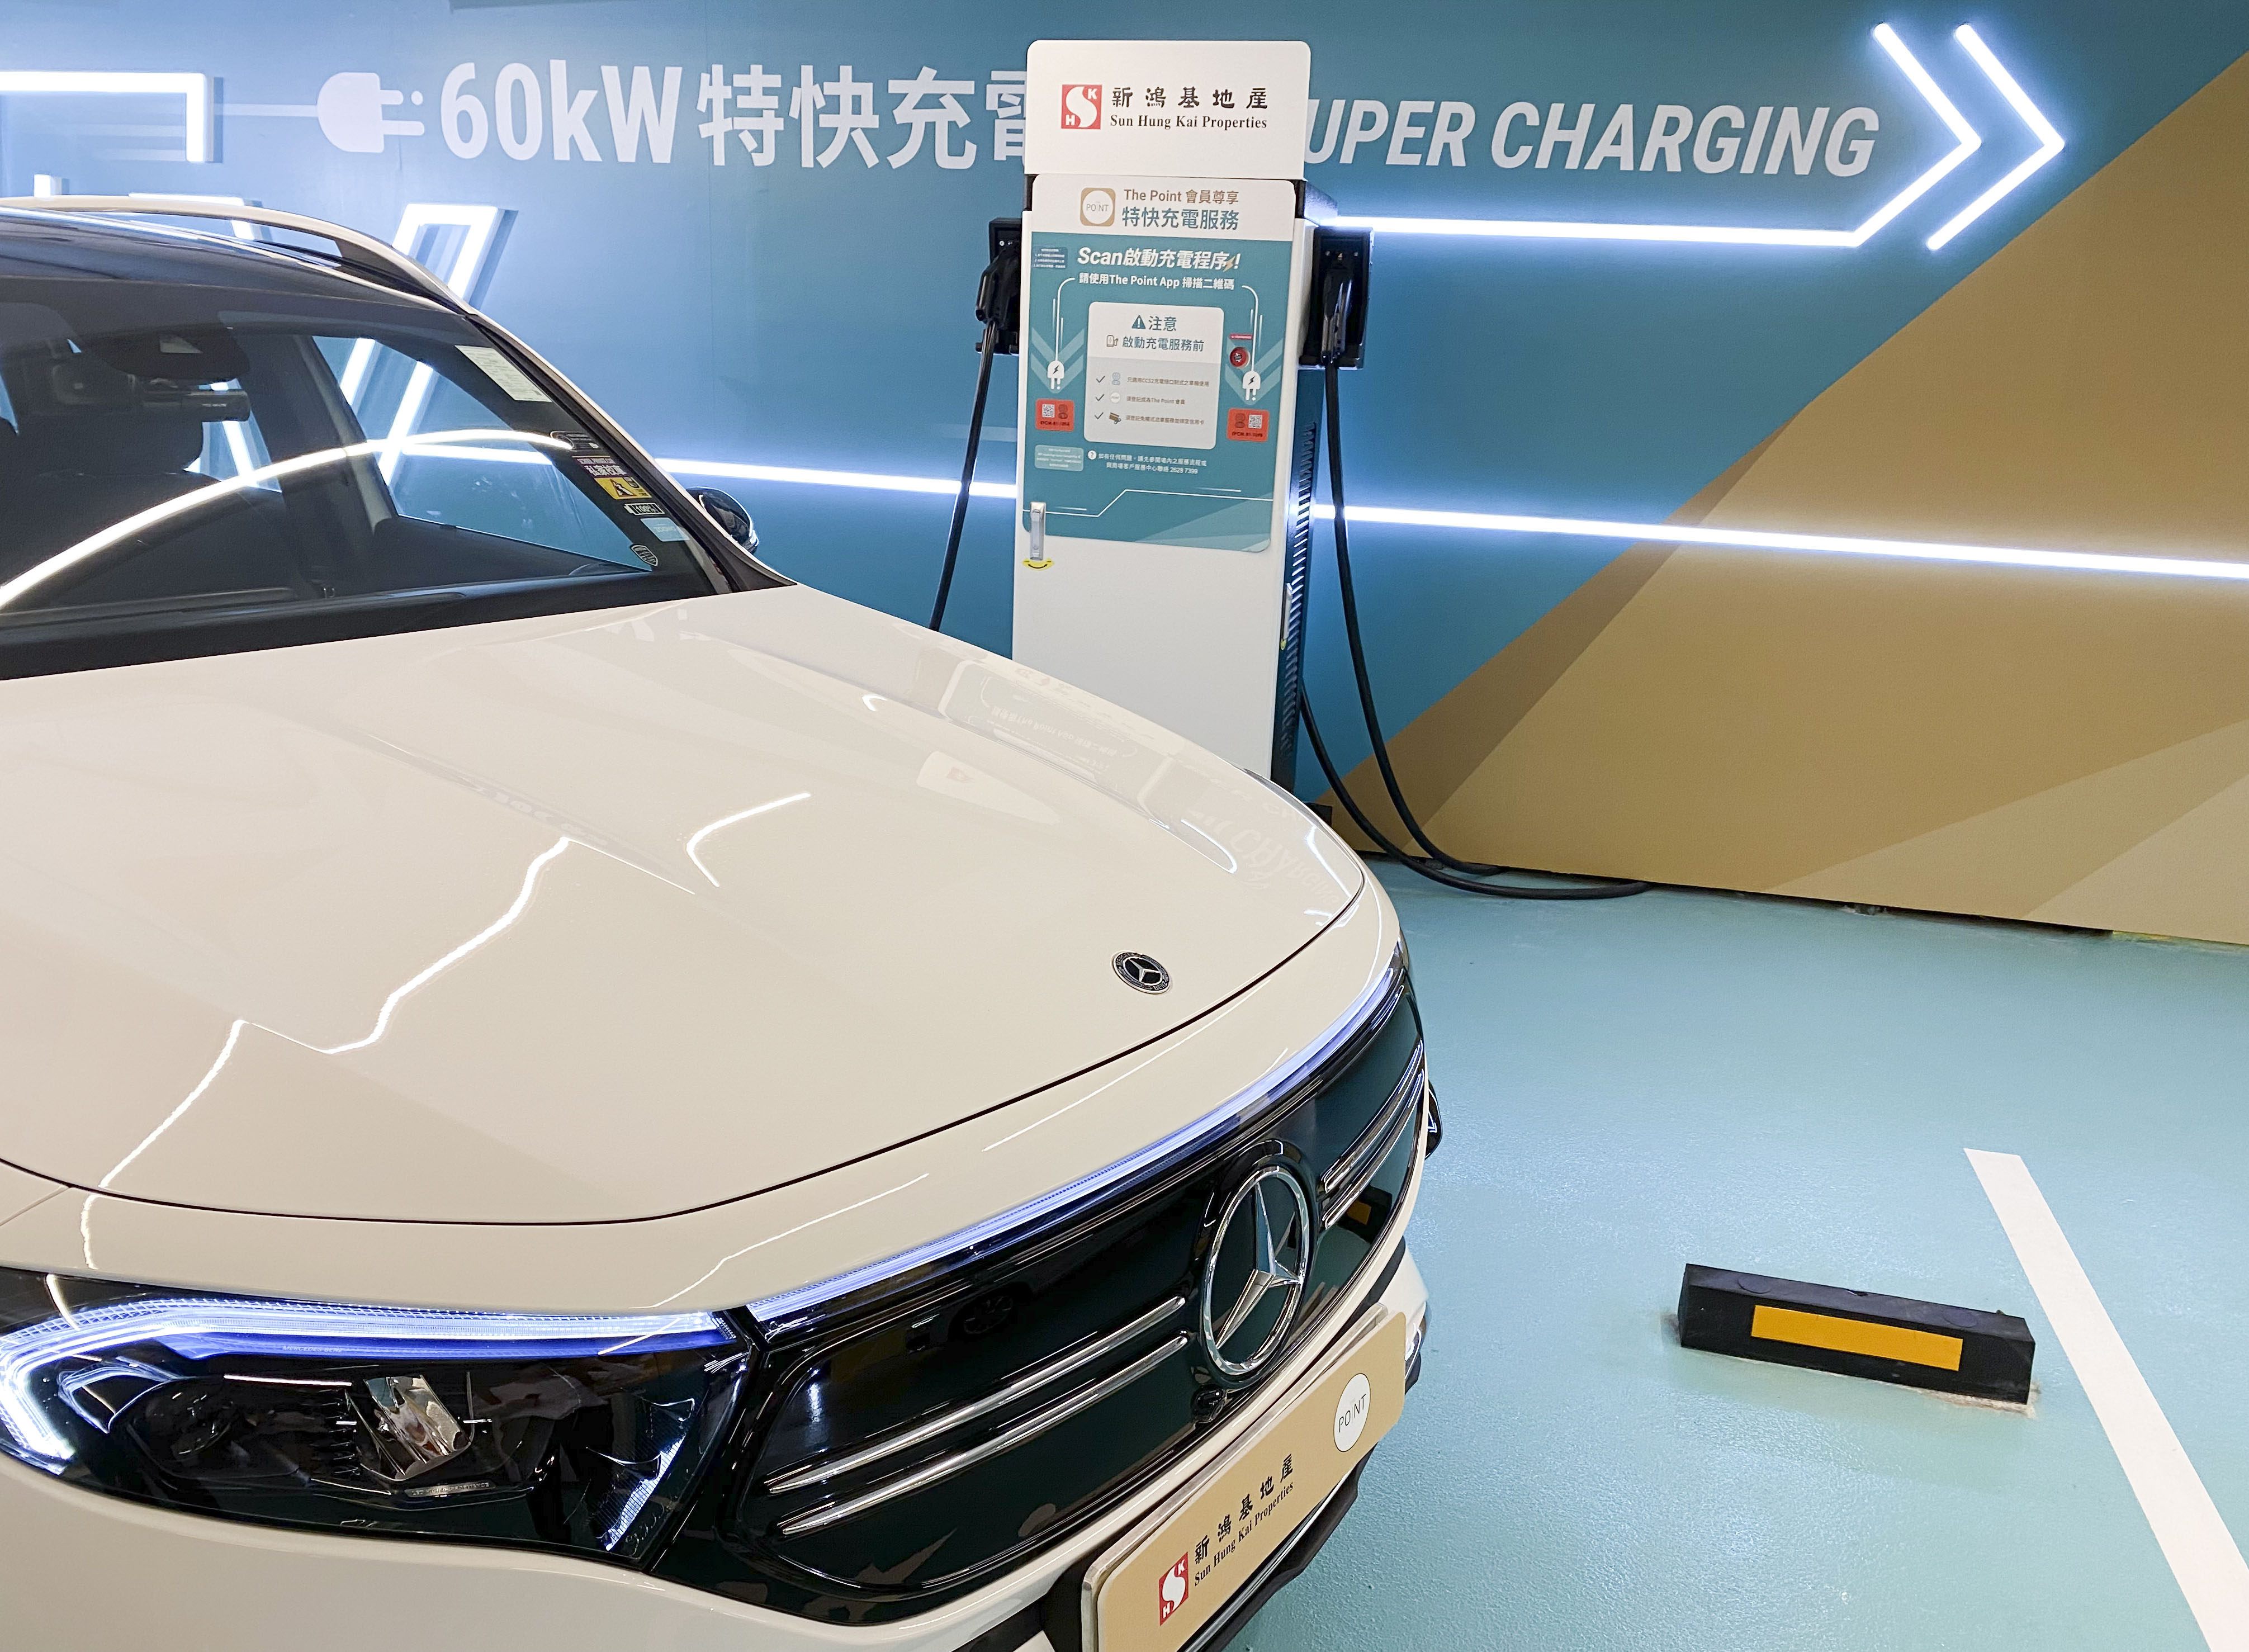 Sun Hung Kai Properties plans to install super-fast EV chargers in 18 malls across Hong Kong by the second quarter of 2024. Photo: Lam Ka-sing